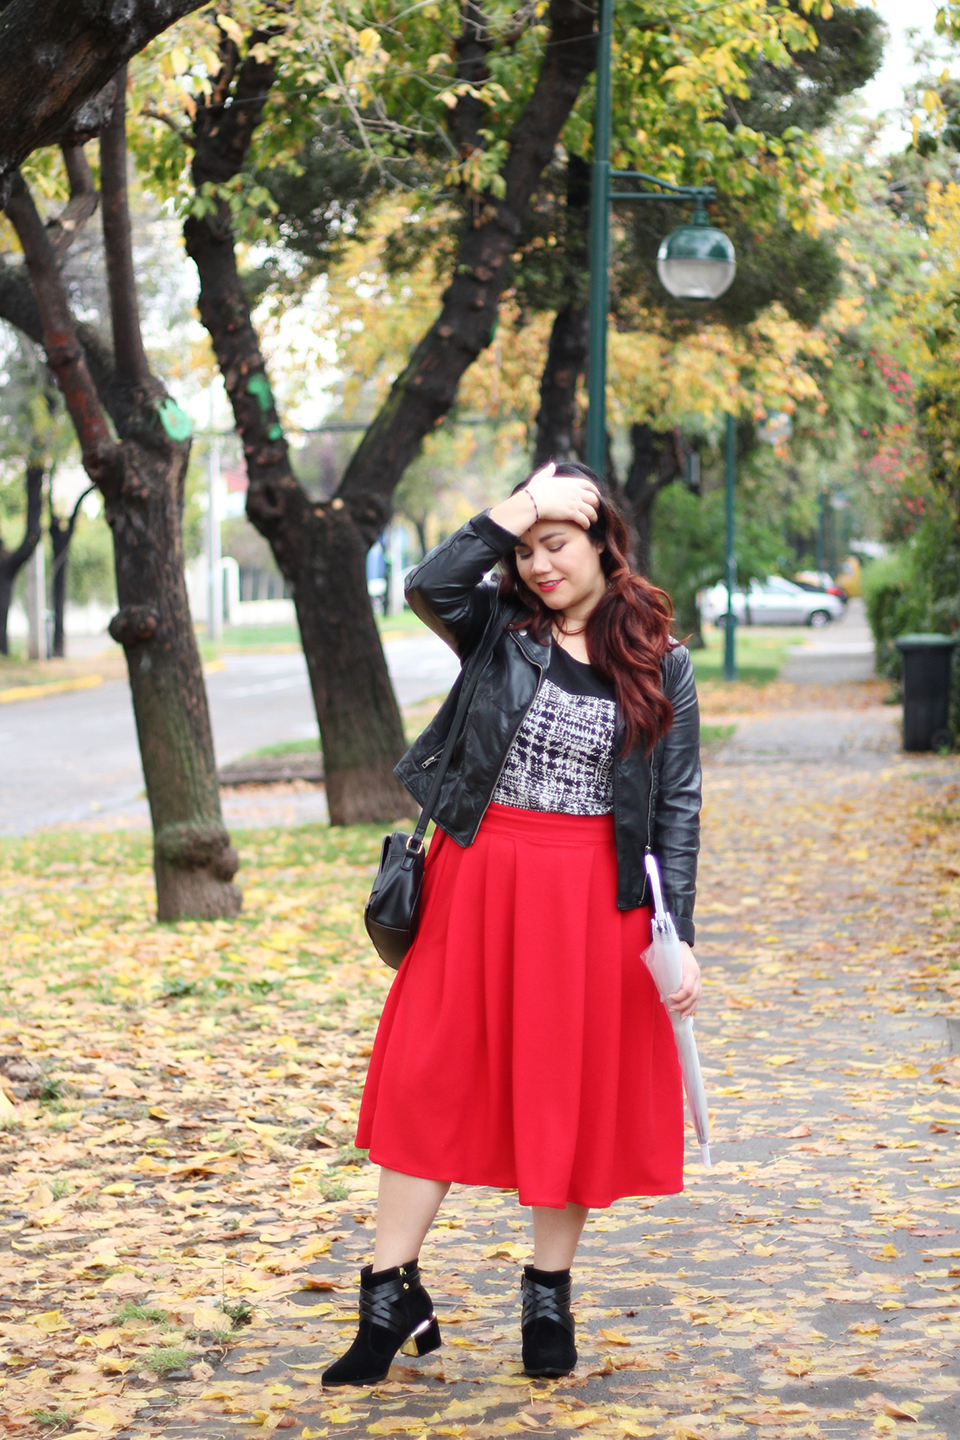 Red midi skirt for fall outfit - Rainy day with pop of color - Outfit ideas for curvy girls